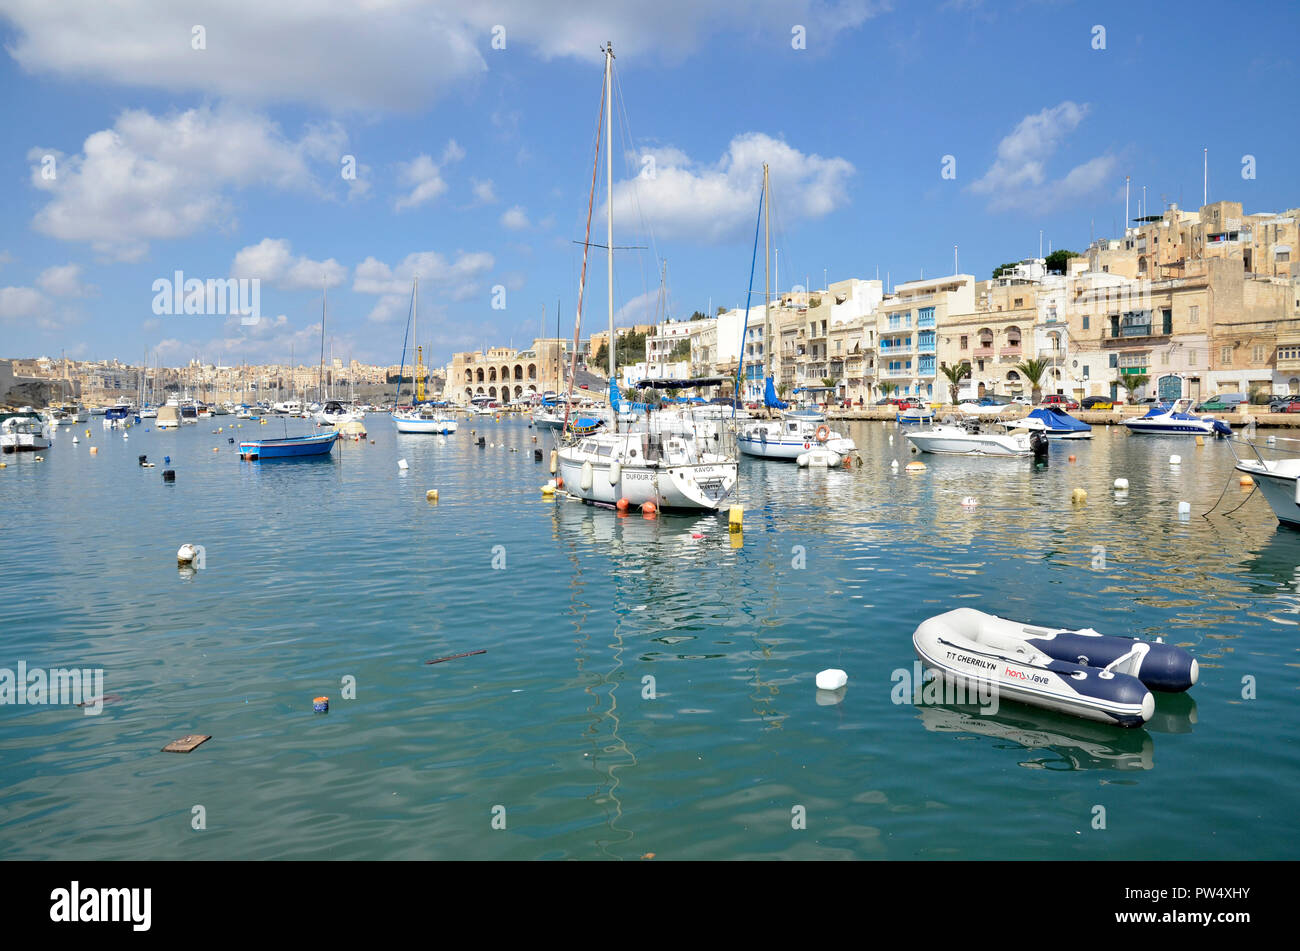 Boats in the Kalkara CReek area of the Grand harbour in the Maltese Three Cities area Stock Photo